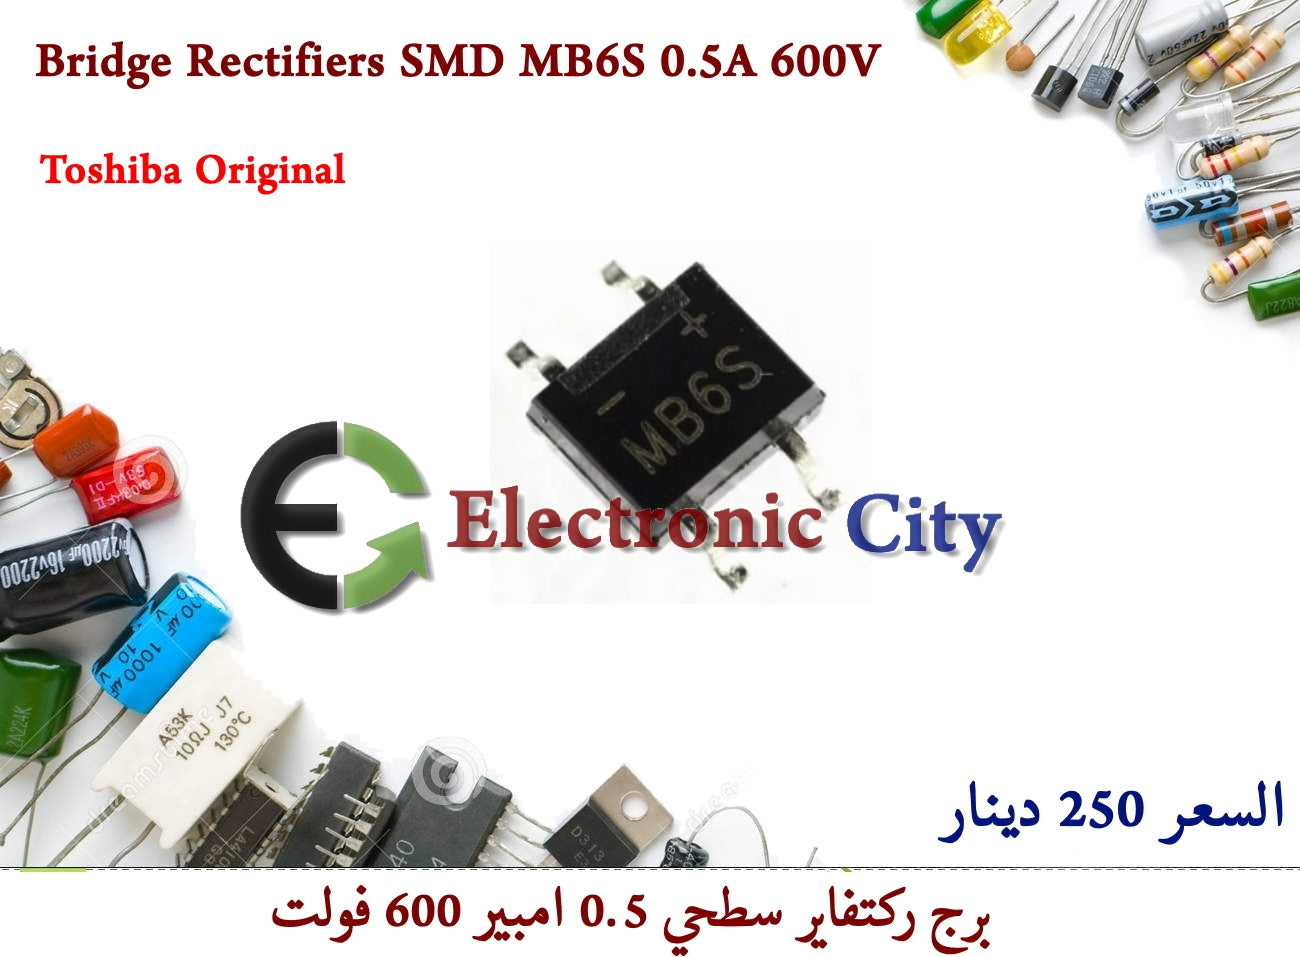 Bridge Rectifiers SMD MB6S 0.5A 600V